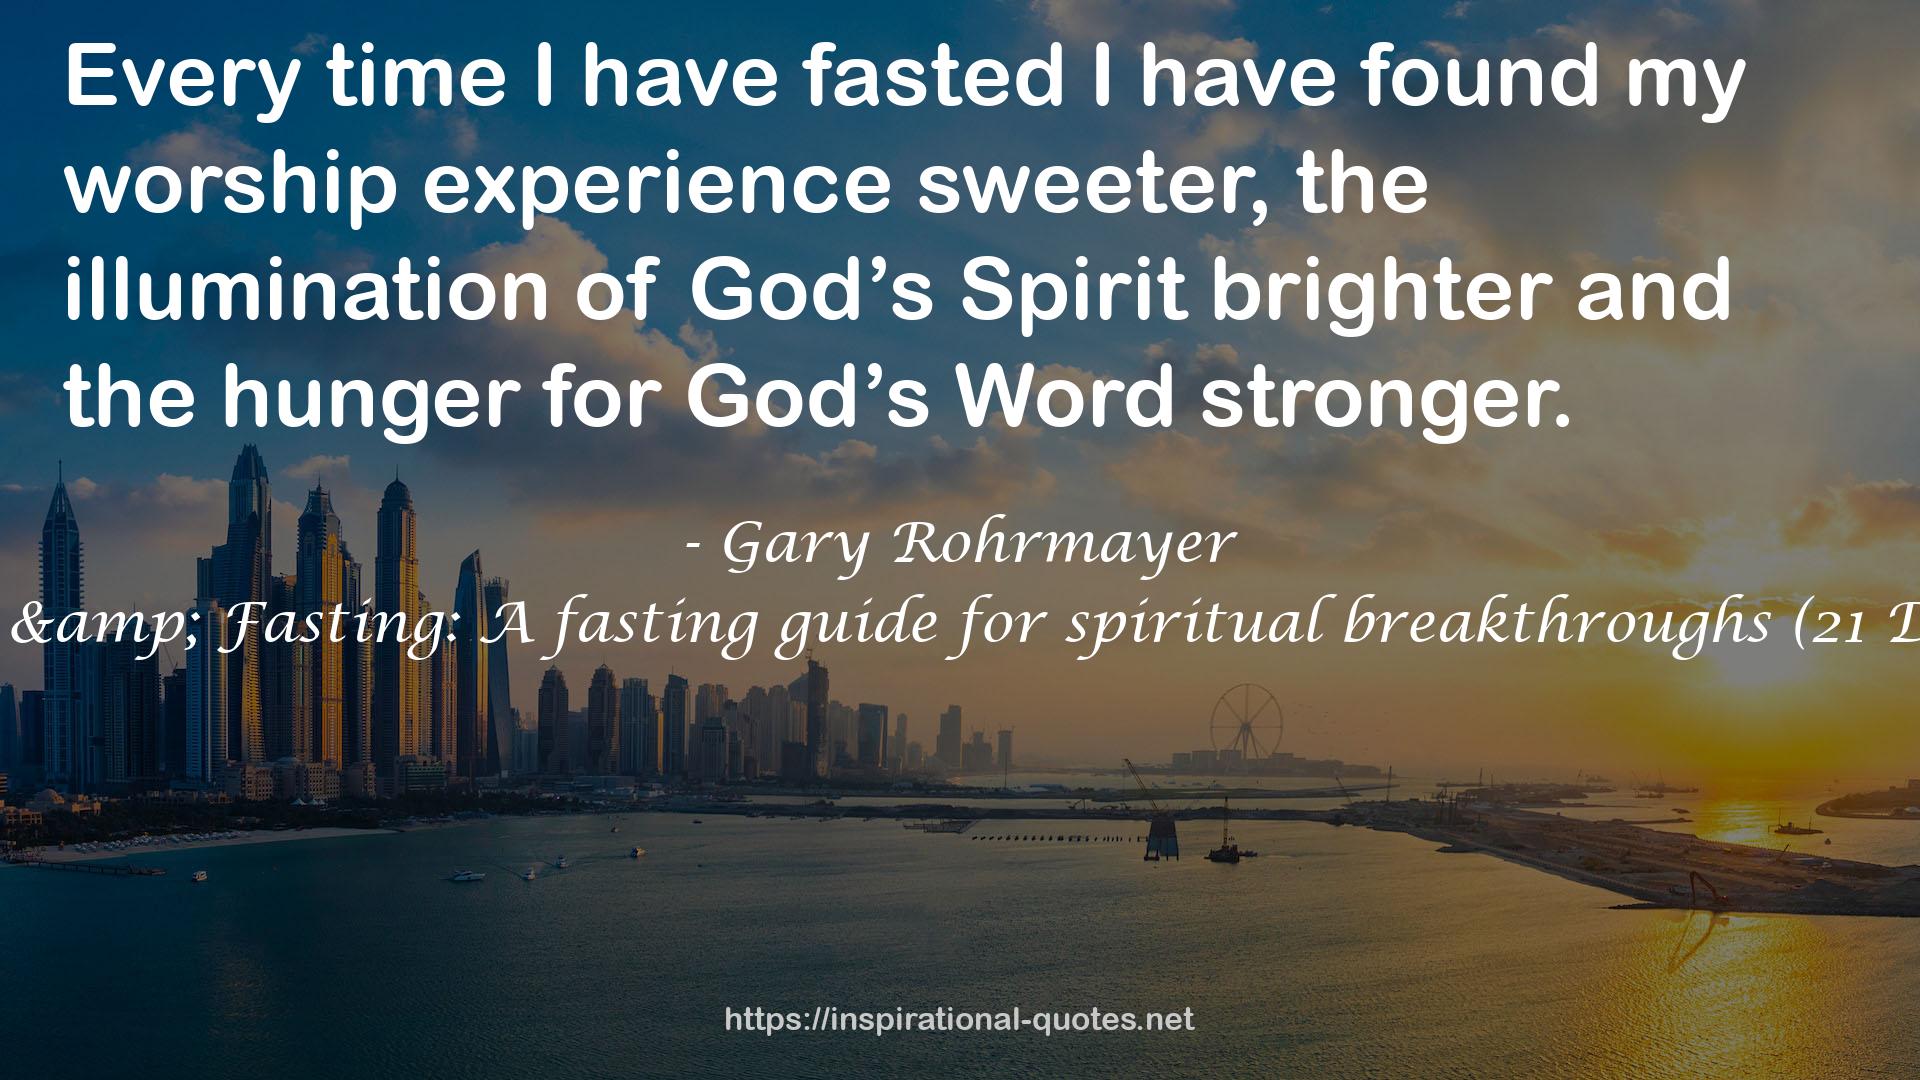 21 Days of Prayer & Fasting: A fasting guide for spiritual breakthroughs (21 Days of Prayer, #2) QUOTES